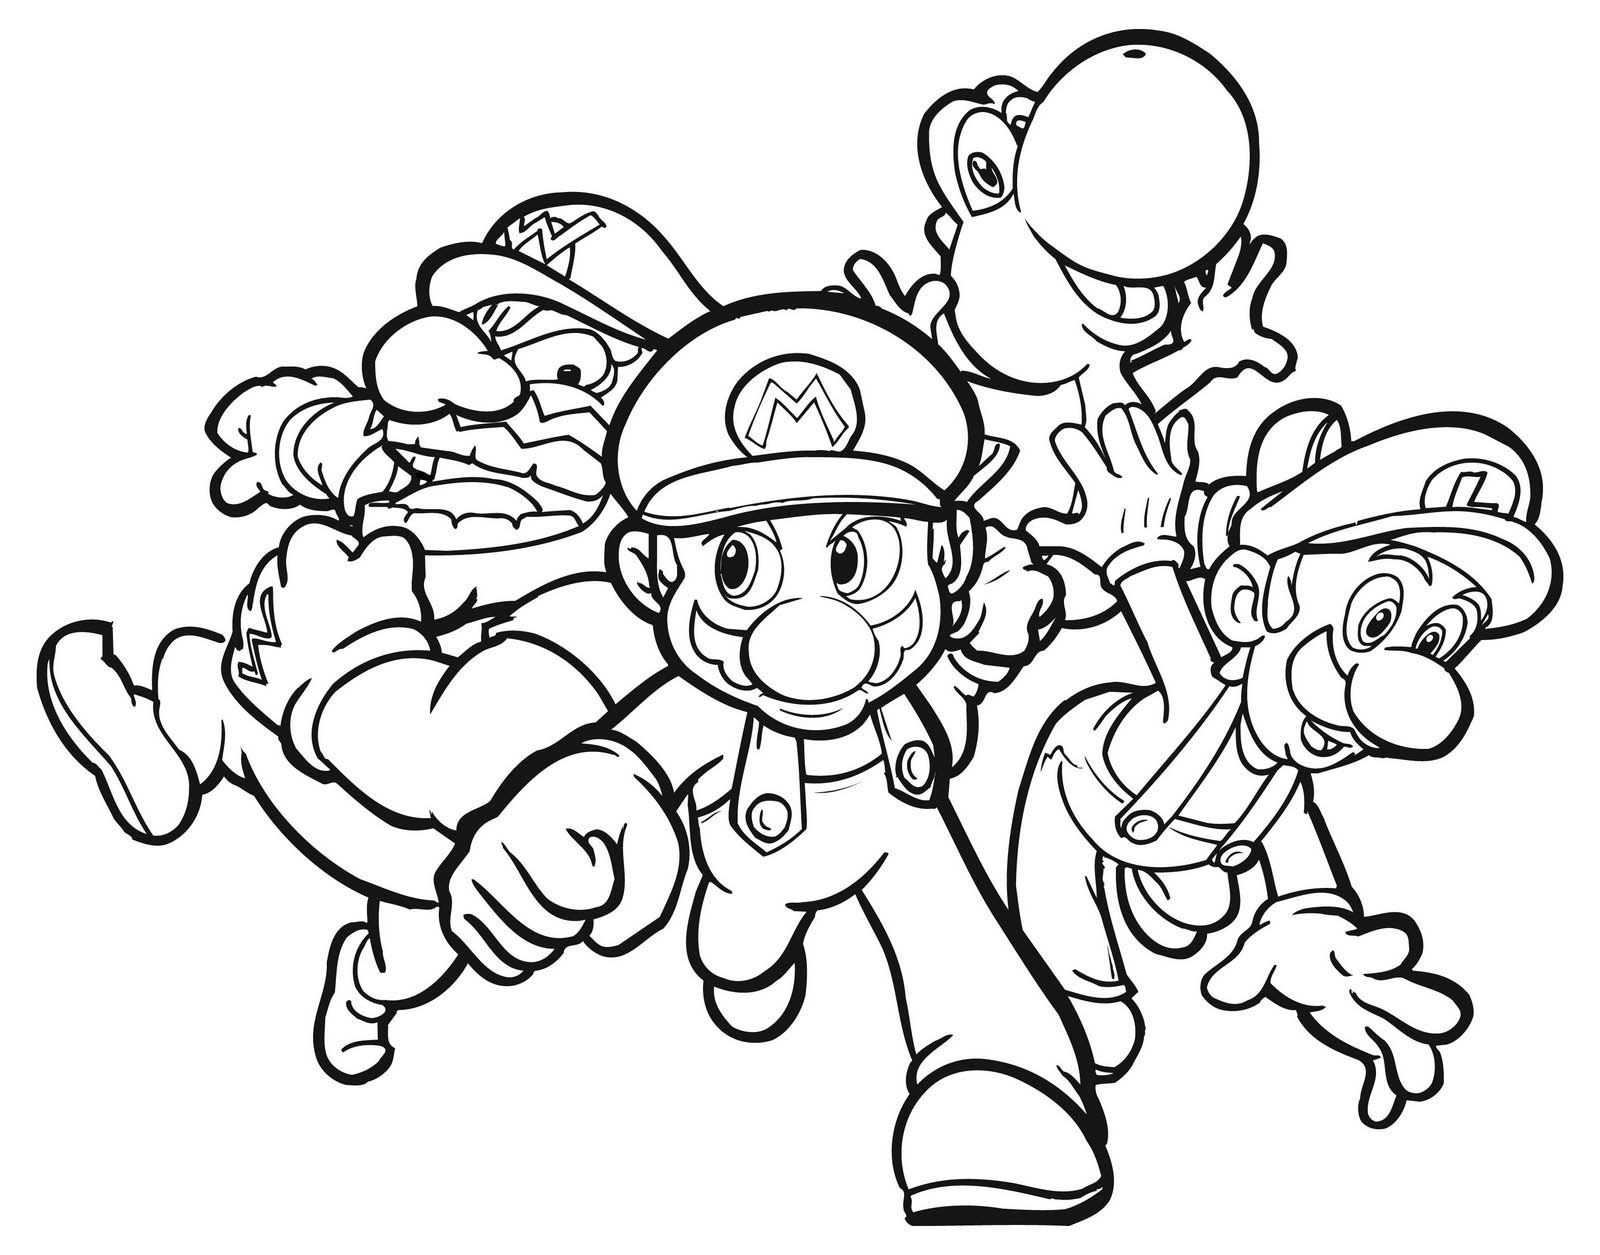 Free Printable Mario Coloring Pages For Kids With Images Super